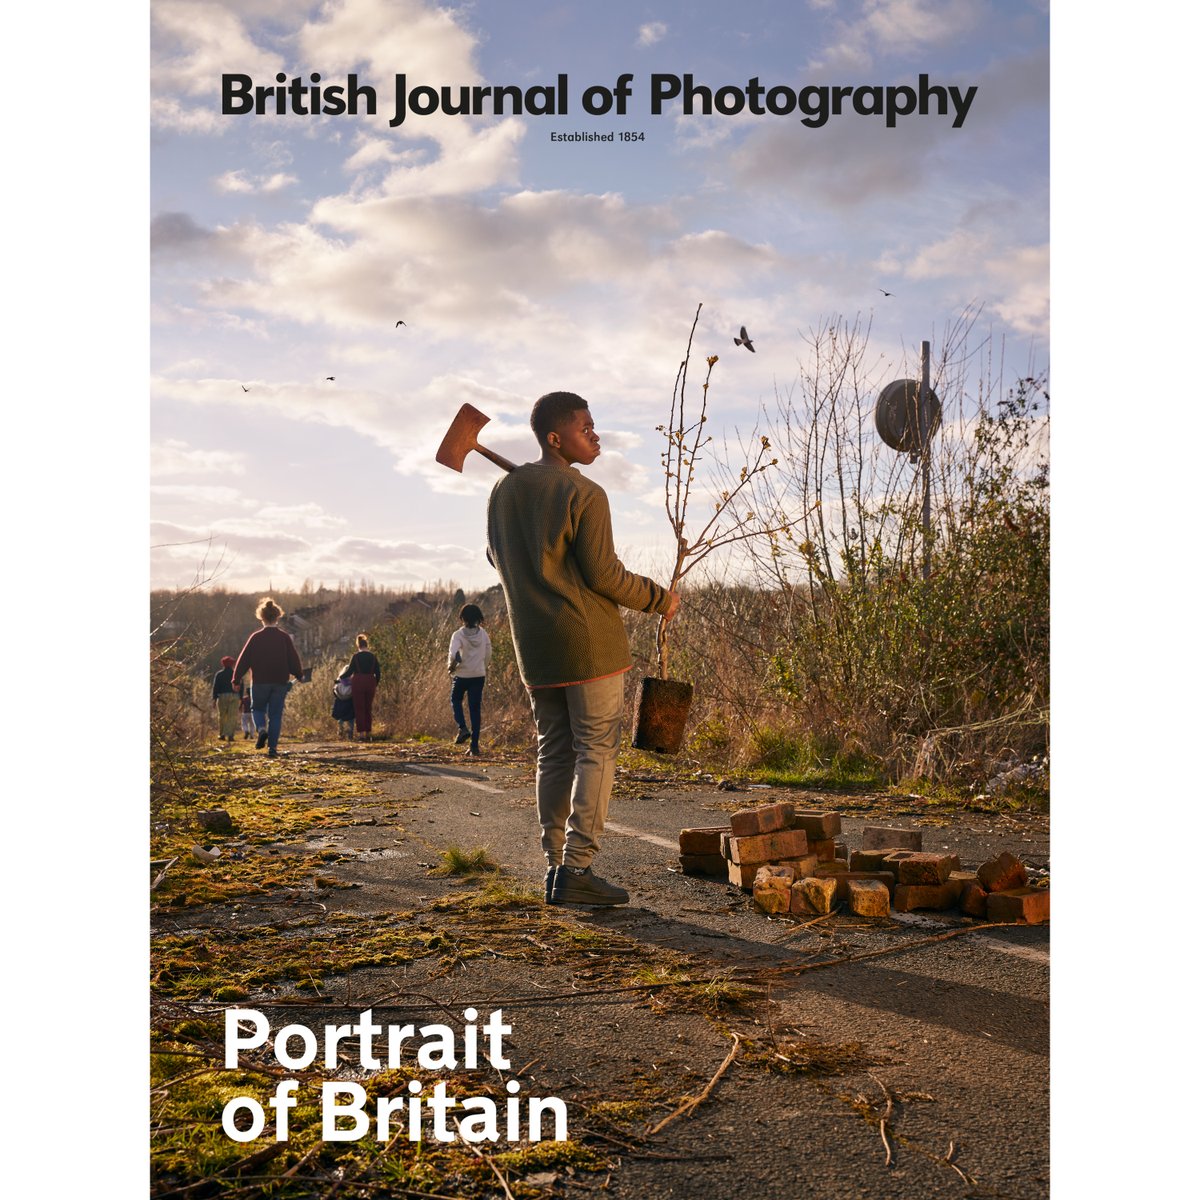 The Portland Inn Project are delighted to be winners of @bjp1854 Portrait of Britain! The photo of Joseph,from the 100 Year Plan poster campaign with Felicity Crawshaw can be seen on @jcdecaux_uk billboards,bus stops & shopping centres across the UK. theguardian.com/artanddesign/g…